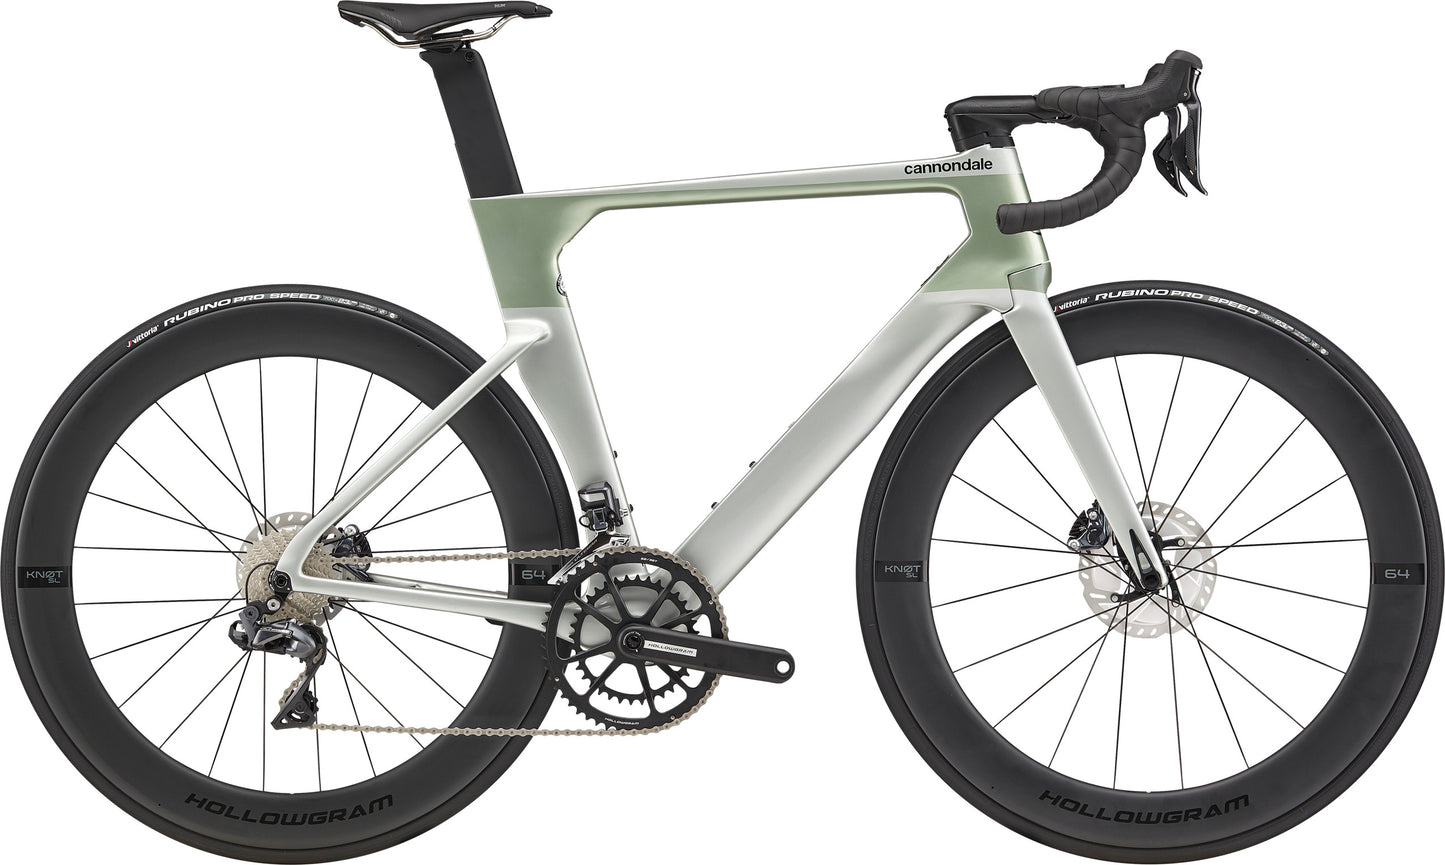 2021 Cannondale 700 M SystemSix Crb Ult Di2